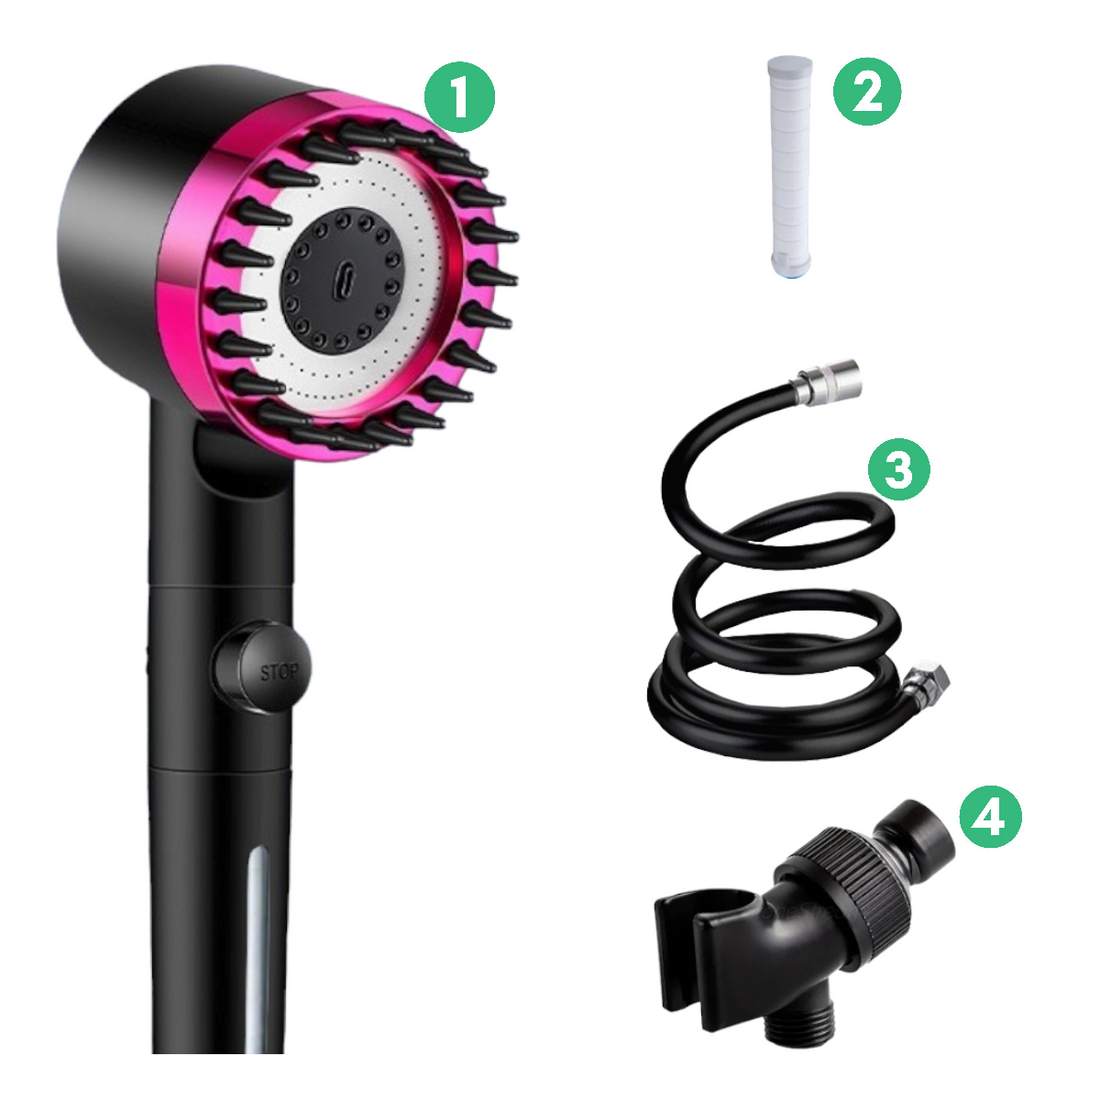 Ultimate Fuchsia Head Massage Shower Wall Kit with Replacement Filters